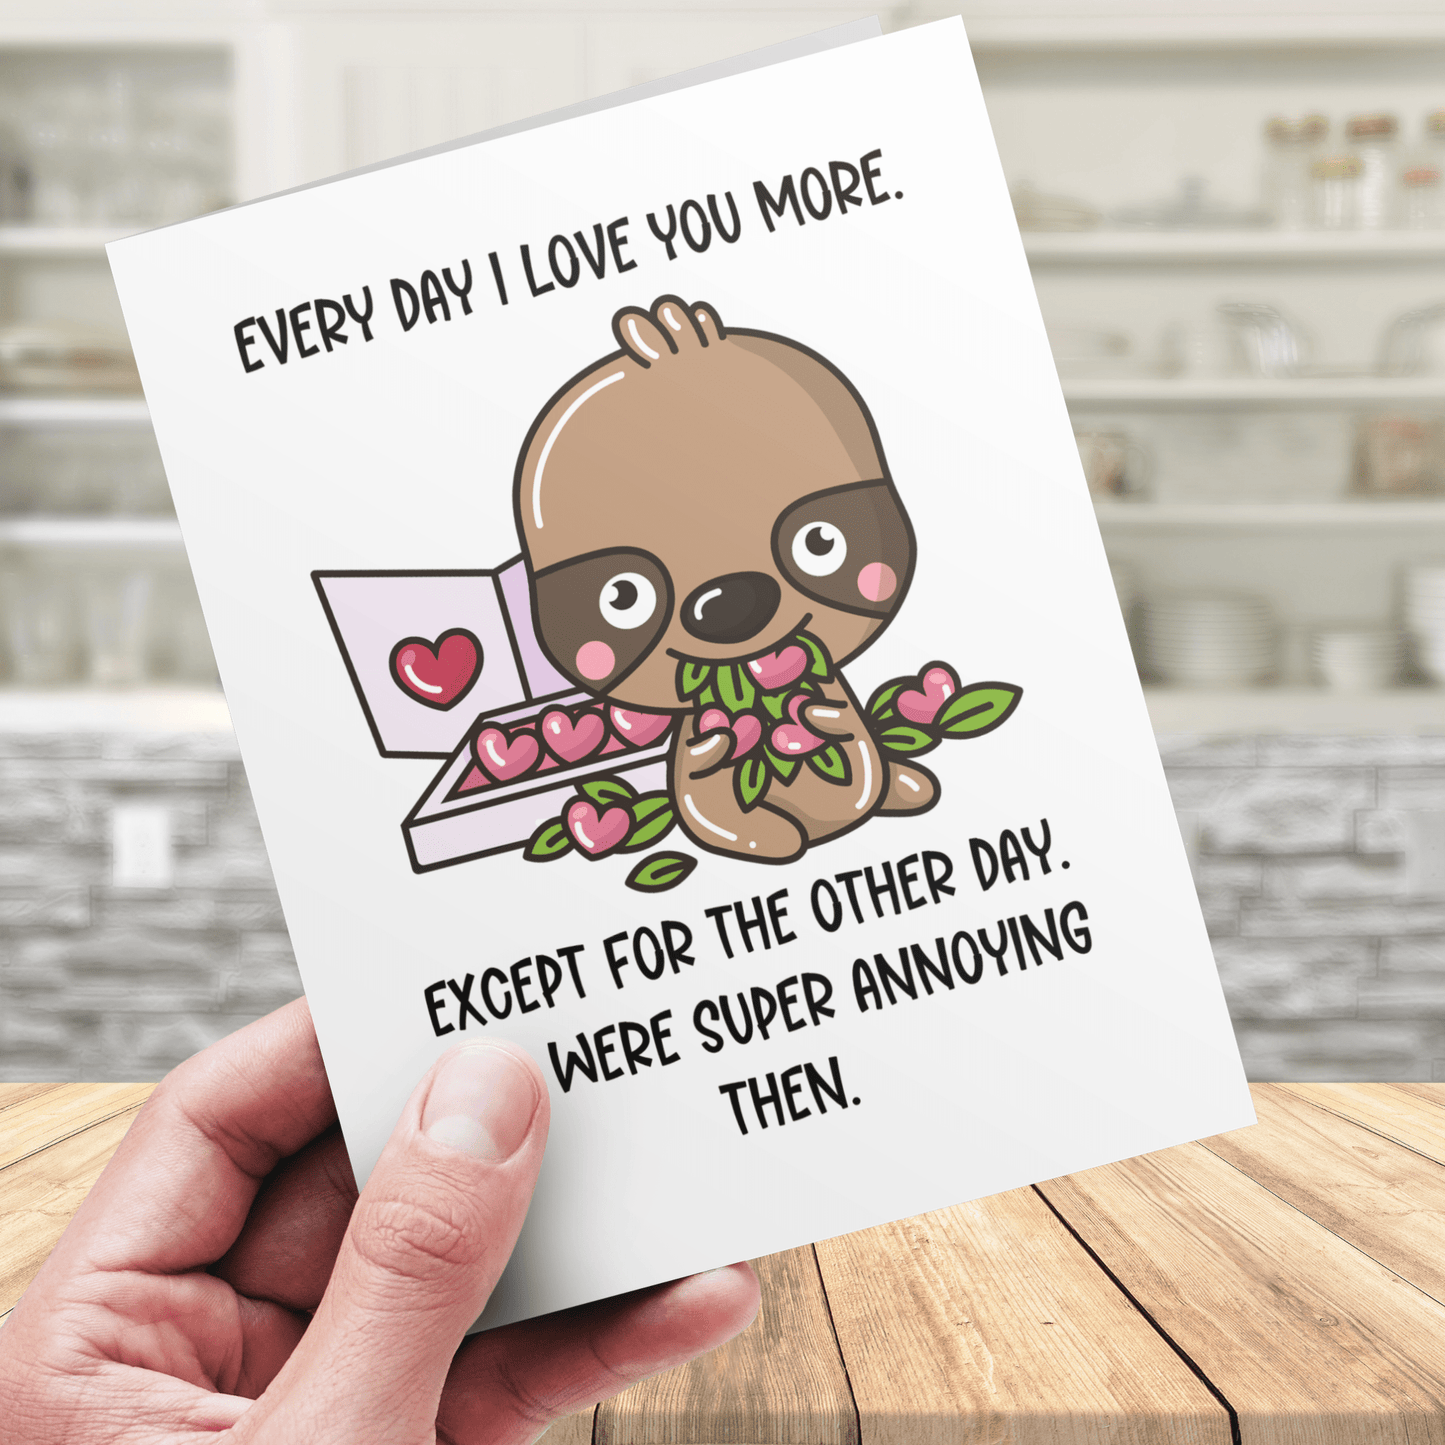 Couple Digital Greeting Card: Every Day I Love You More...